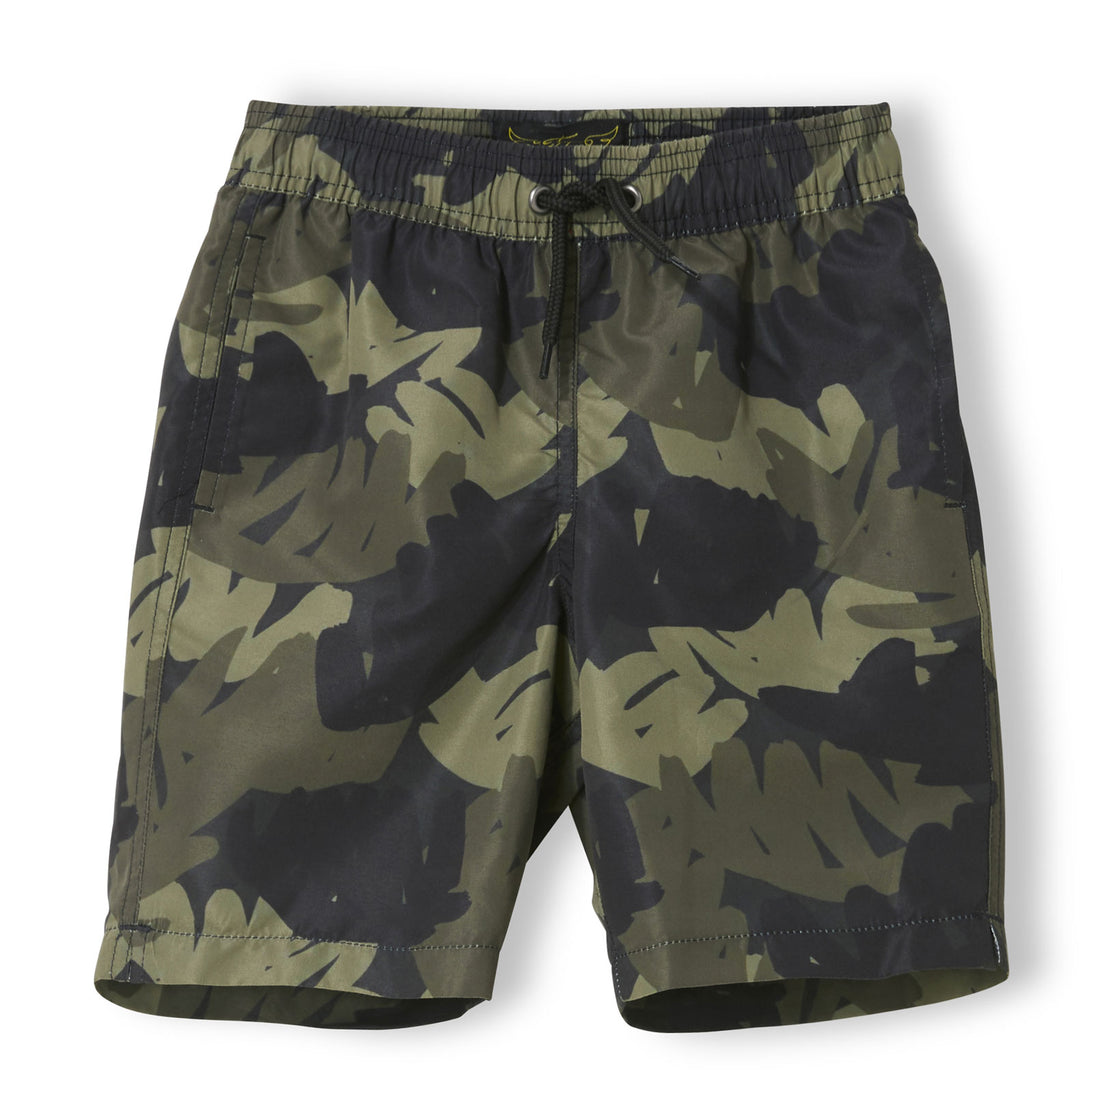 Finger in the Nose Khaki Tropical Leafs Goodboy Swim Trunks